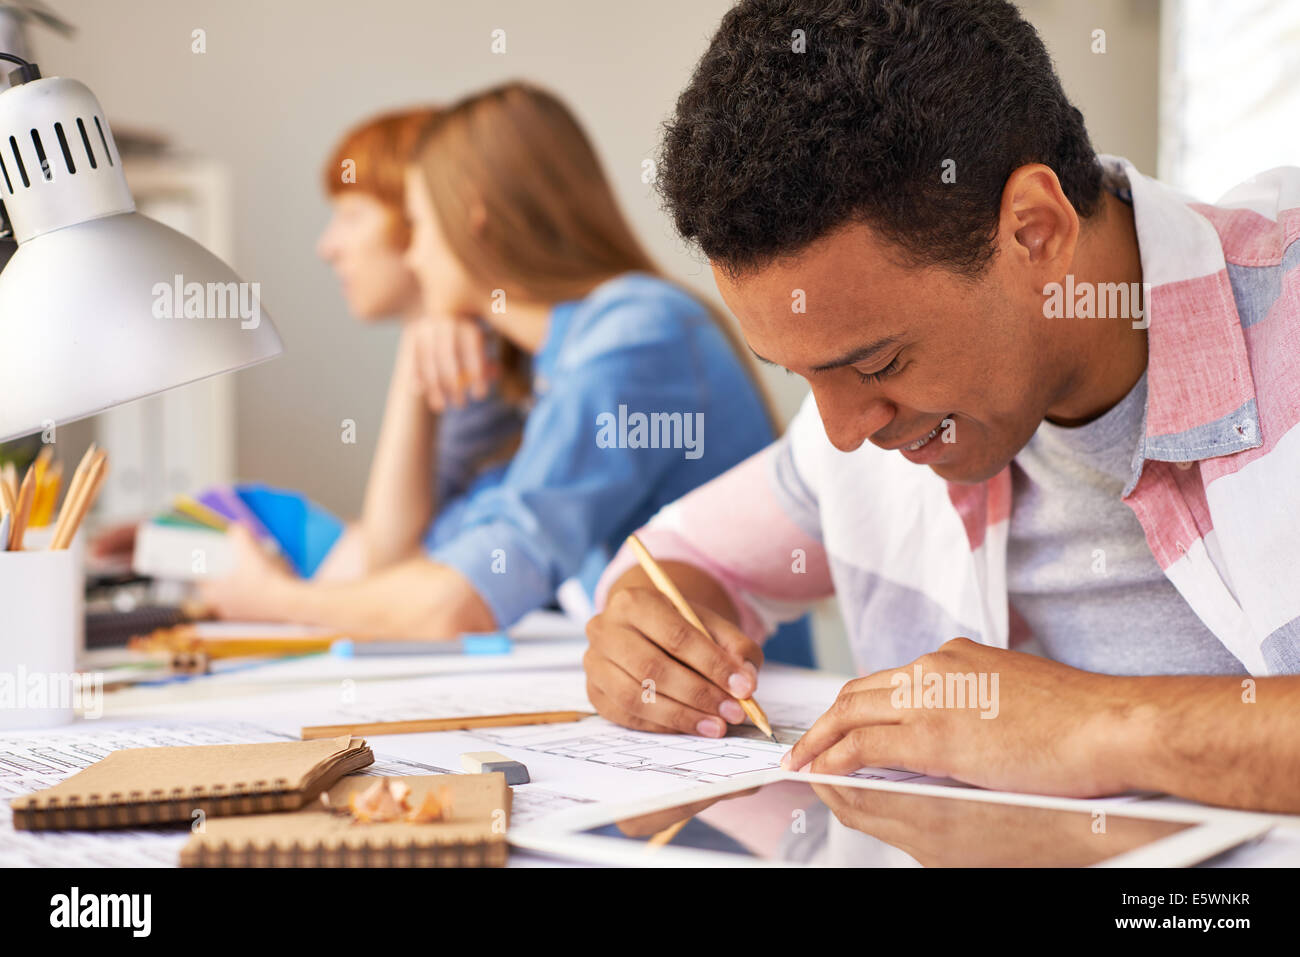 Portrait of smart guy making sketch at lesson Stock Photo